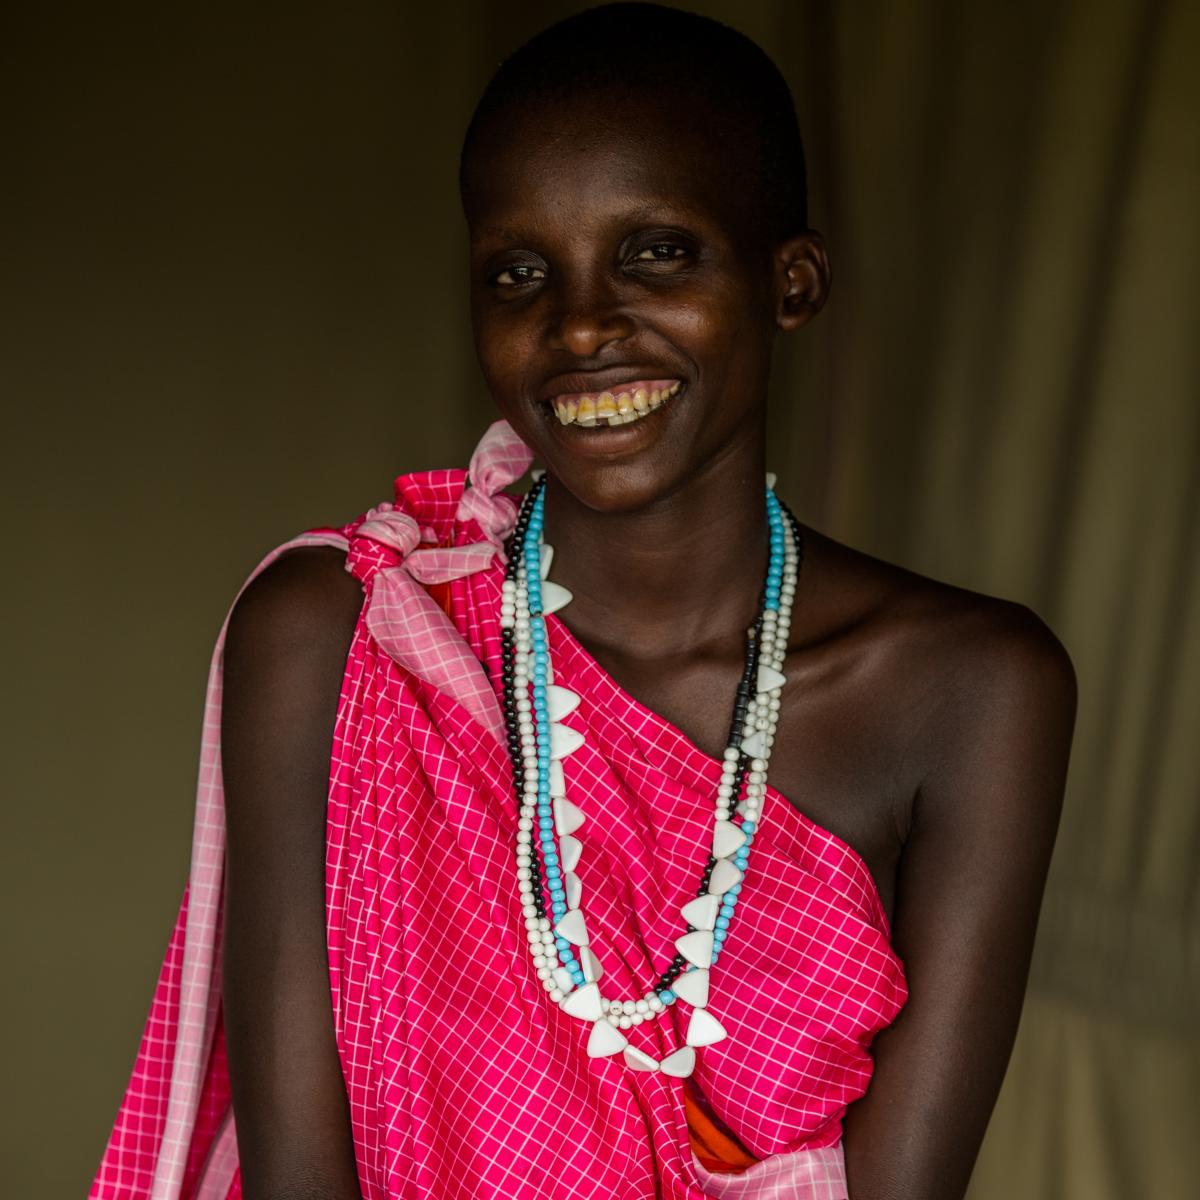 A portrait of a smiling Tanzanian woman in bright colored clothing.